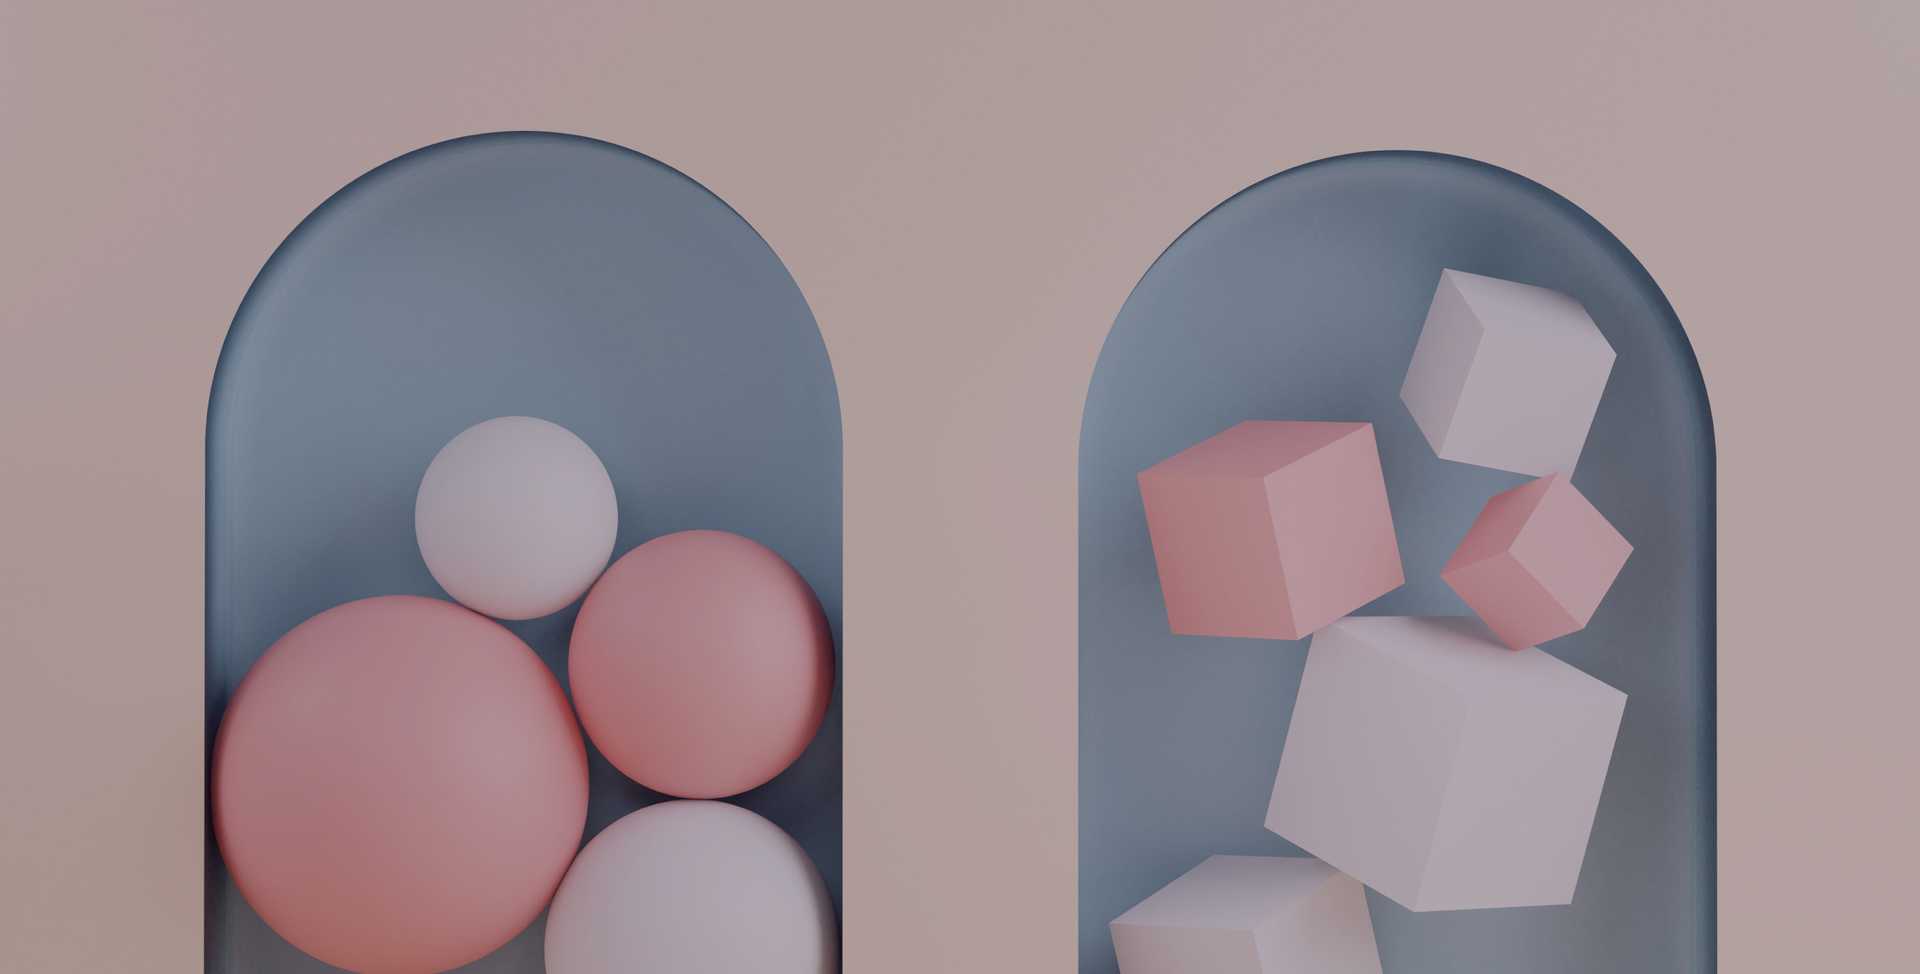 Abstract 3D rendering of two different compartments, one containing spheres and another containing cubes, representing different types of activities